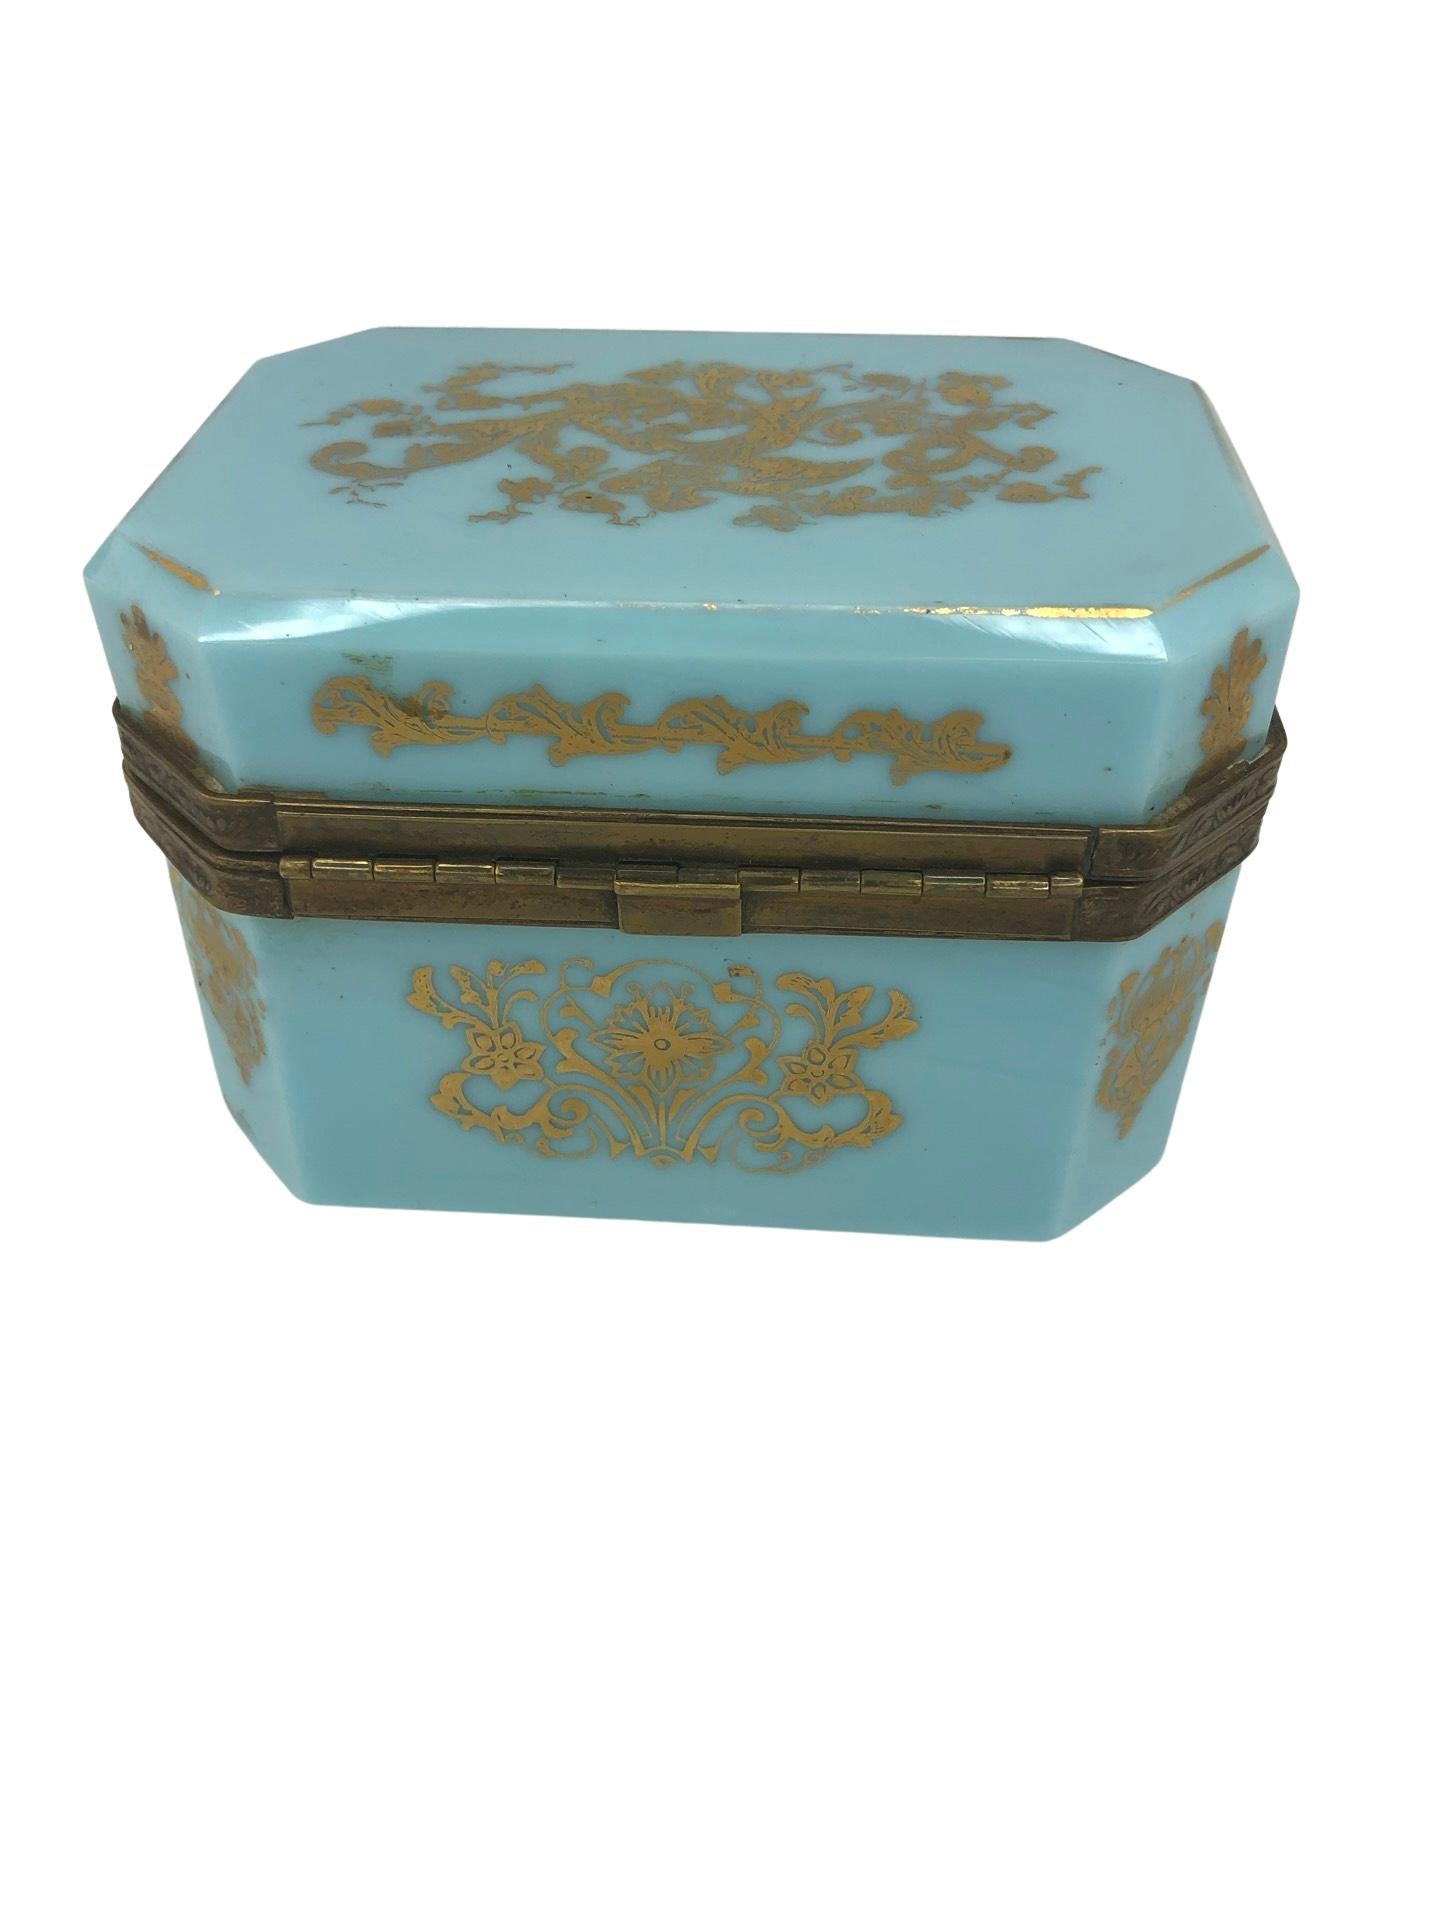 Early 20th Century French Blue Opaline and Bronze Jewelry Vanity Box, Hand painted Gold Decoration